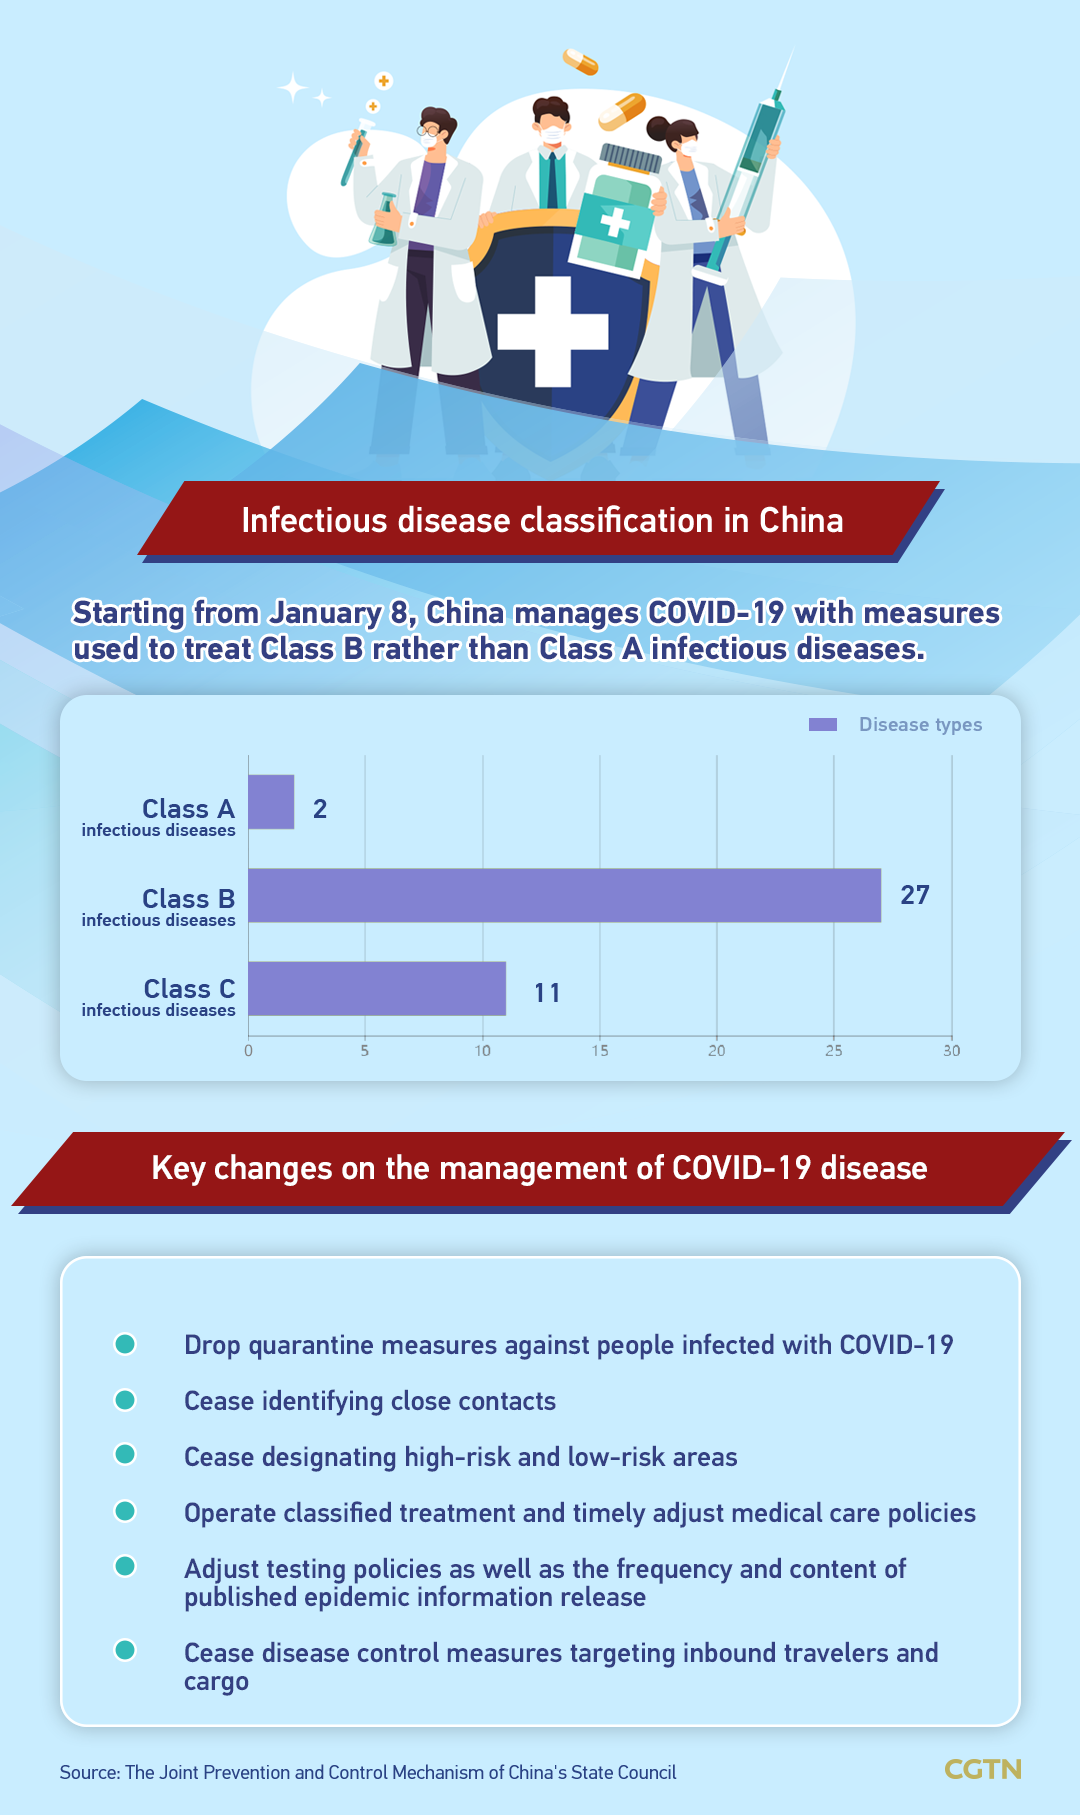 China downgrades COVID-19 rules as nation readies for normal life